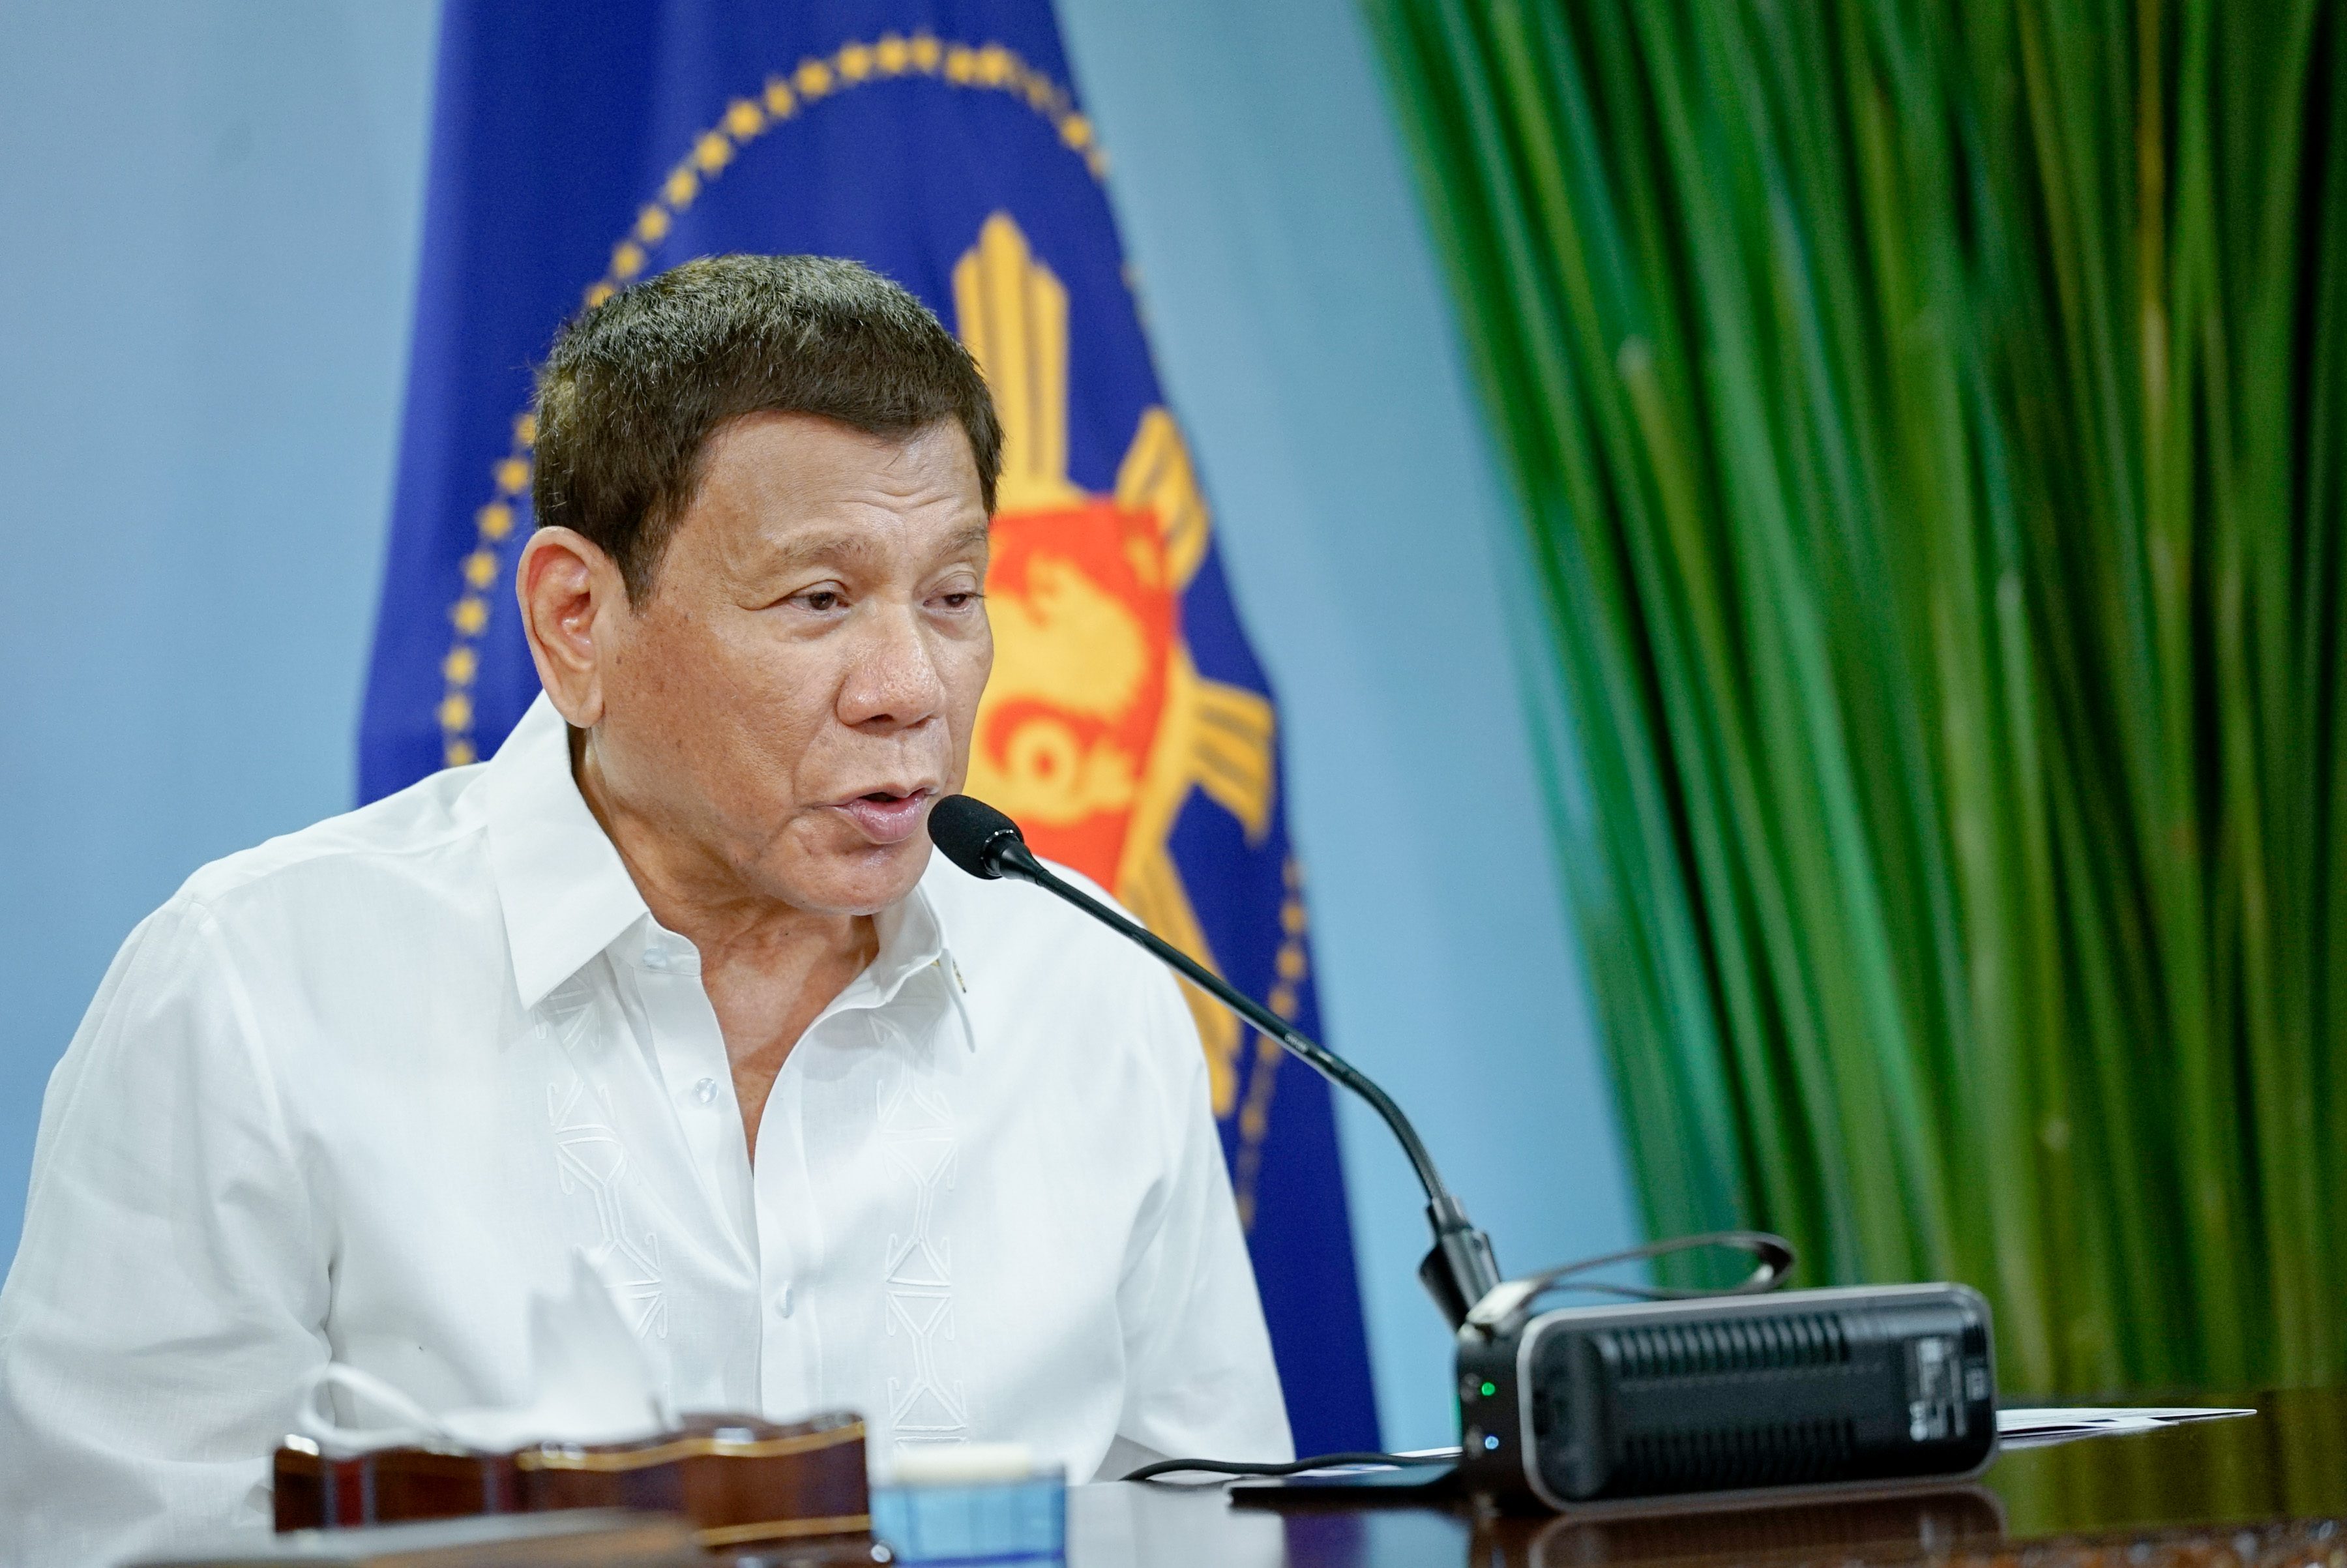 Duterte at COVAX summit: Vaccine access imbalance ‘must be corrected’